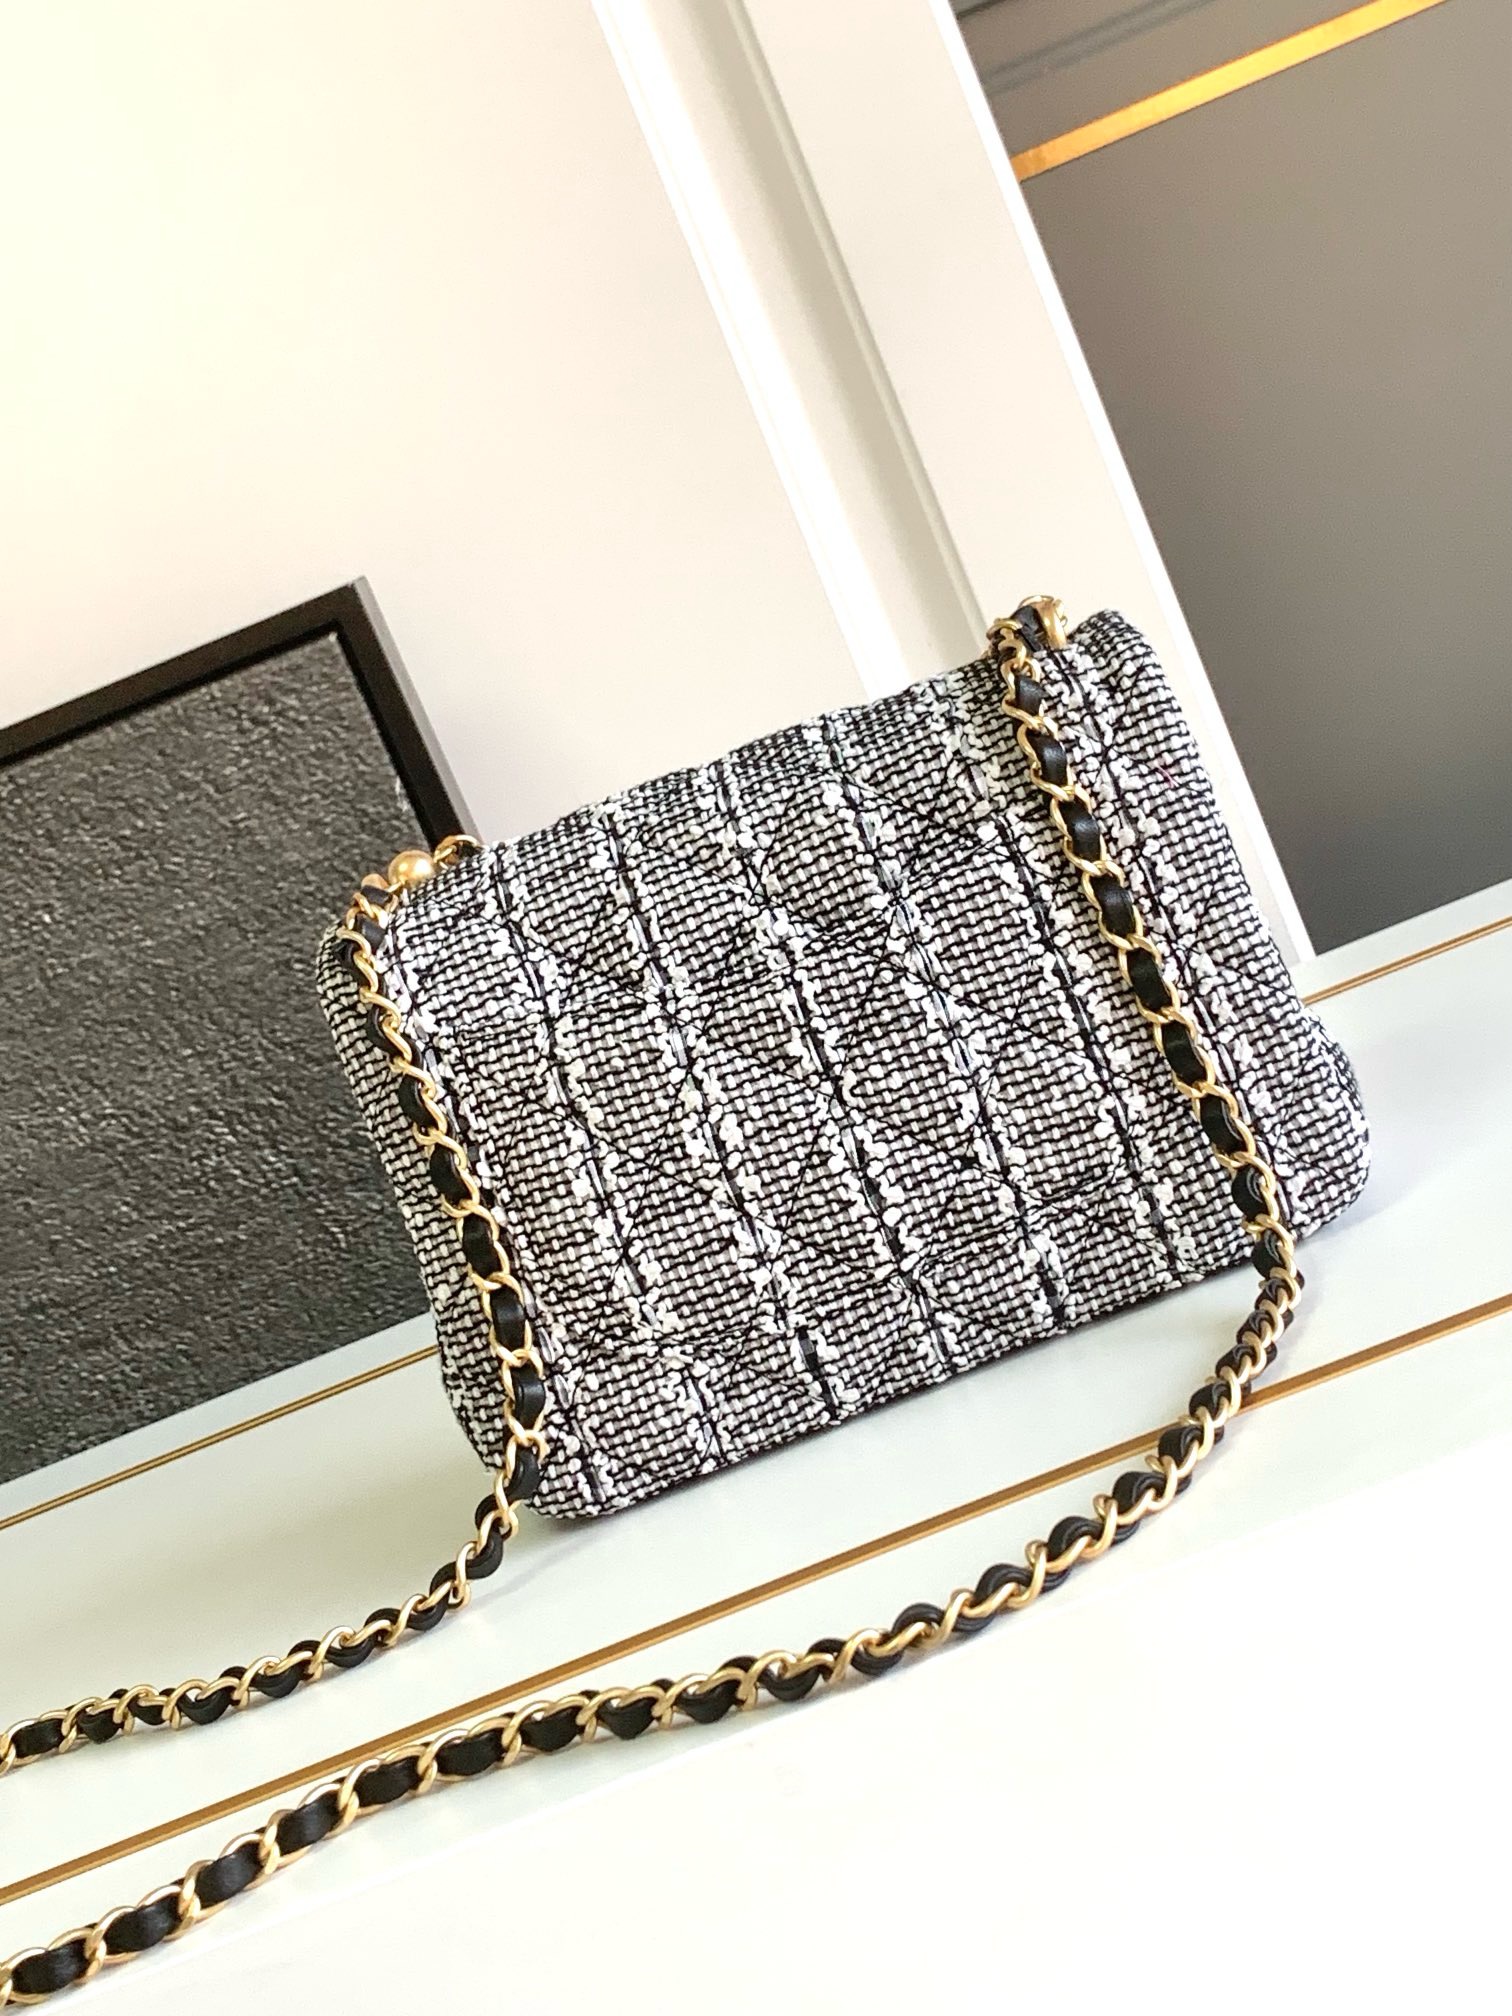 Chanel SMALL FLAP BAG Cotton Tweed AS4384 GRAY